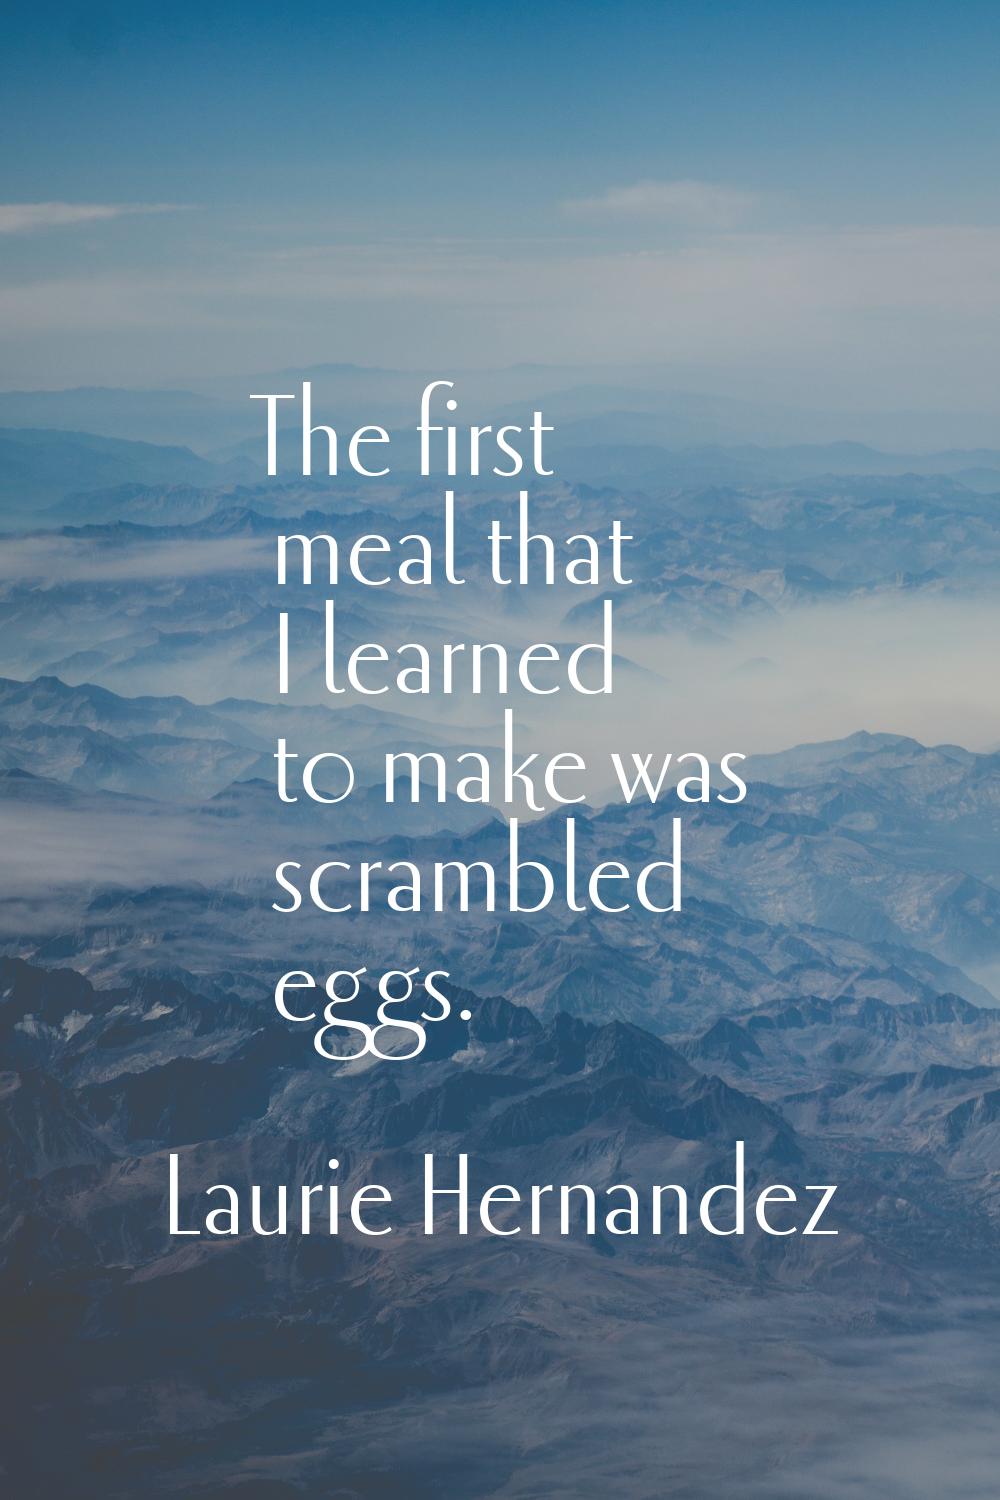 The first meal that I learned to make was scrambled eggs.